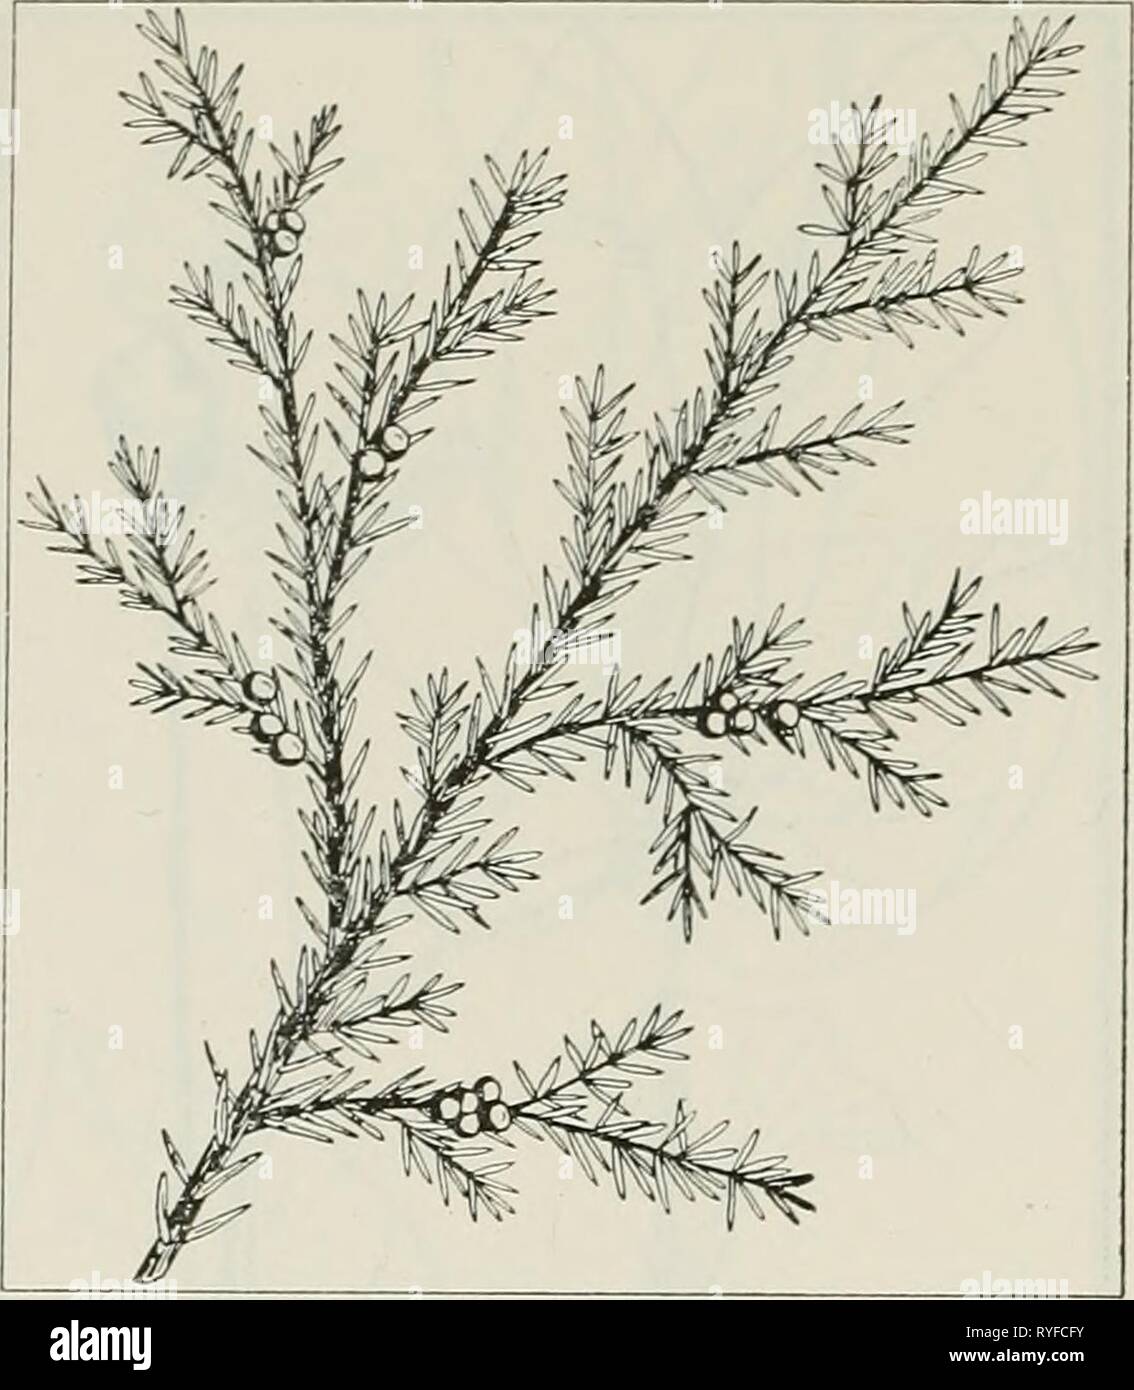 The drug plants of Illinois  drugplantsofilli44teho Year: 1951  70 ILLINOIS NATURAL HISTORY SURVEY Circular 44    JUNIPERUS COMMUNIS L. Com- mon juniper, hackmatack, horse savin, gorst. Pinaceae. U. S. P. XI, p. 256.— A low and spreading or upright, small shrub or tree, evergreen; bark of the trunk shreddy; foliage in the form of needles, the needles straight, rigid, sharp-pointed, up to ]/i inch long; flowers lacking, cones present instead; fruit blue, glaucous, berry- like, 14 inch in diameter, 3-seeded. The fruit collected in fall and winter, when ripe. In cultivation as an ornamen- tal; es Stock Photo